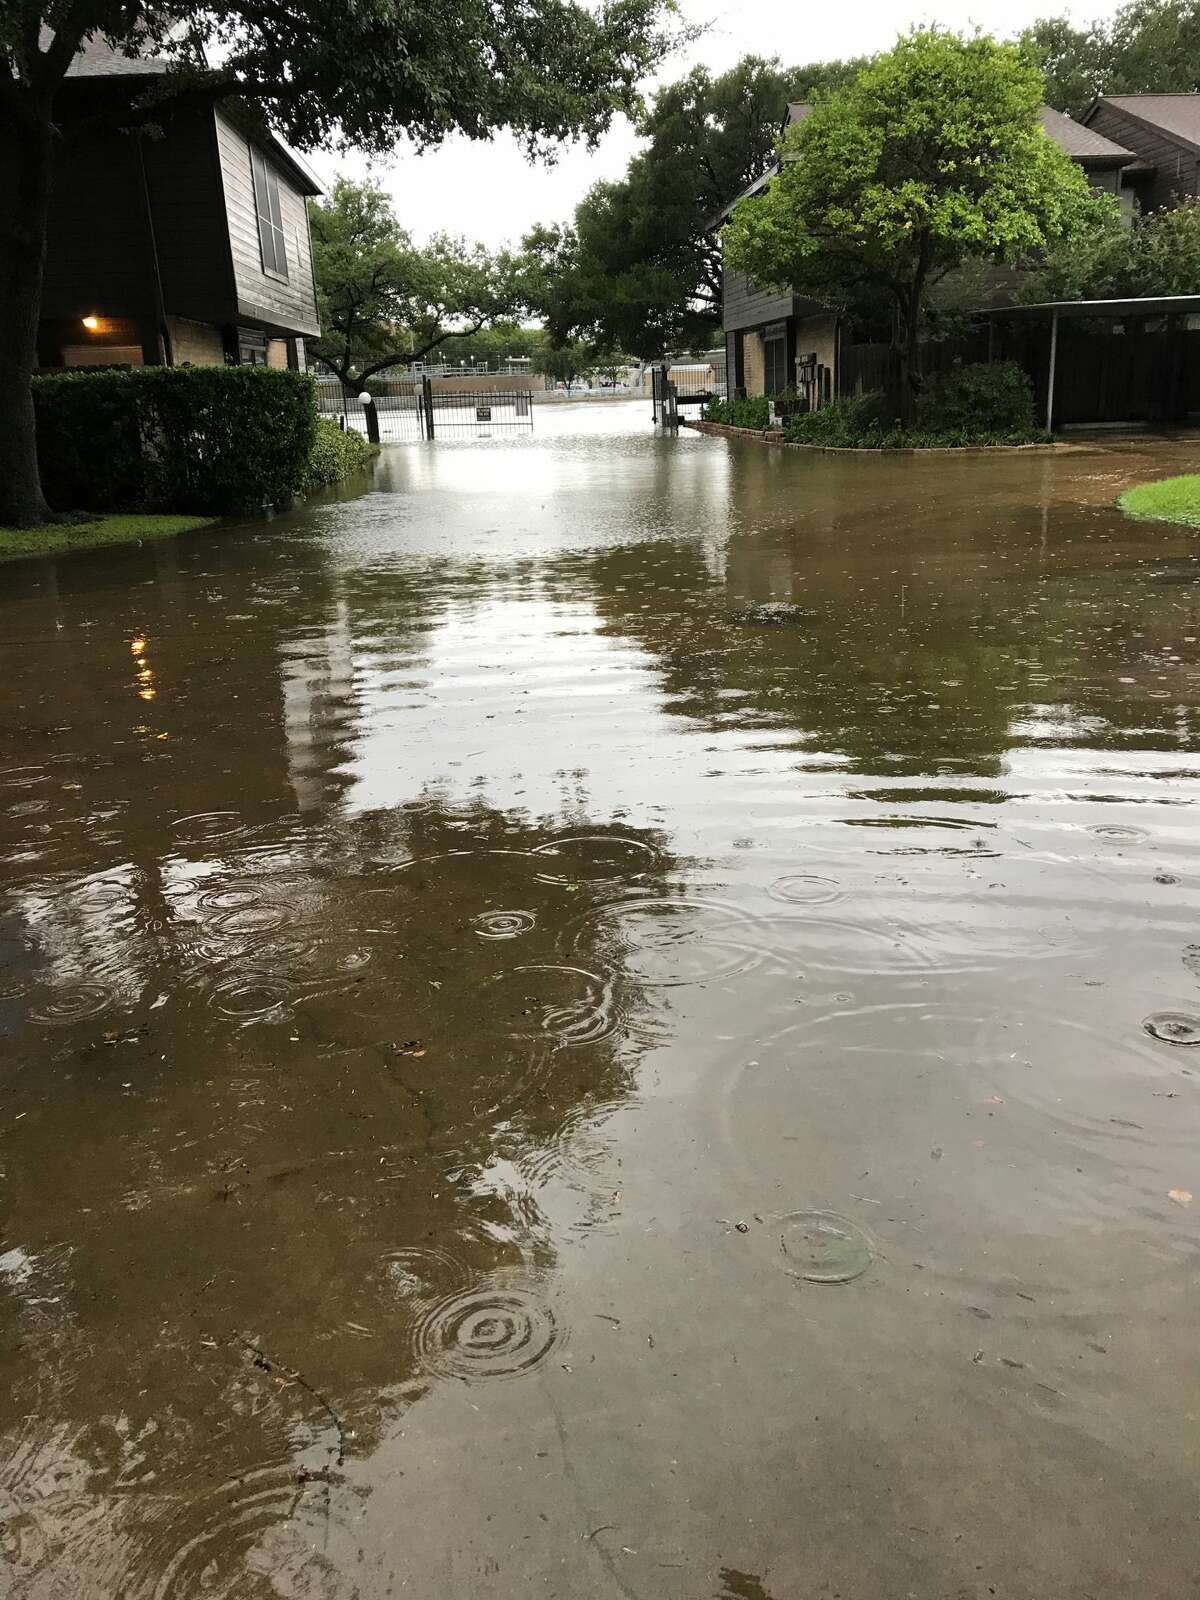 A reader submitted this photo of flooding on Braeswood, near Kirby.